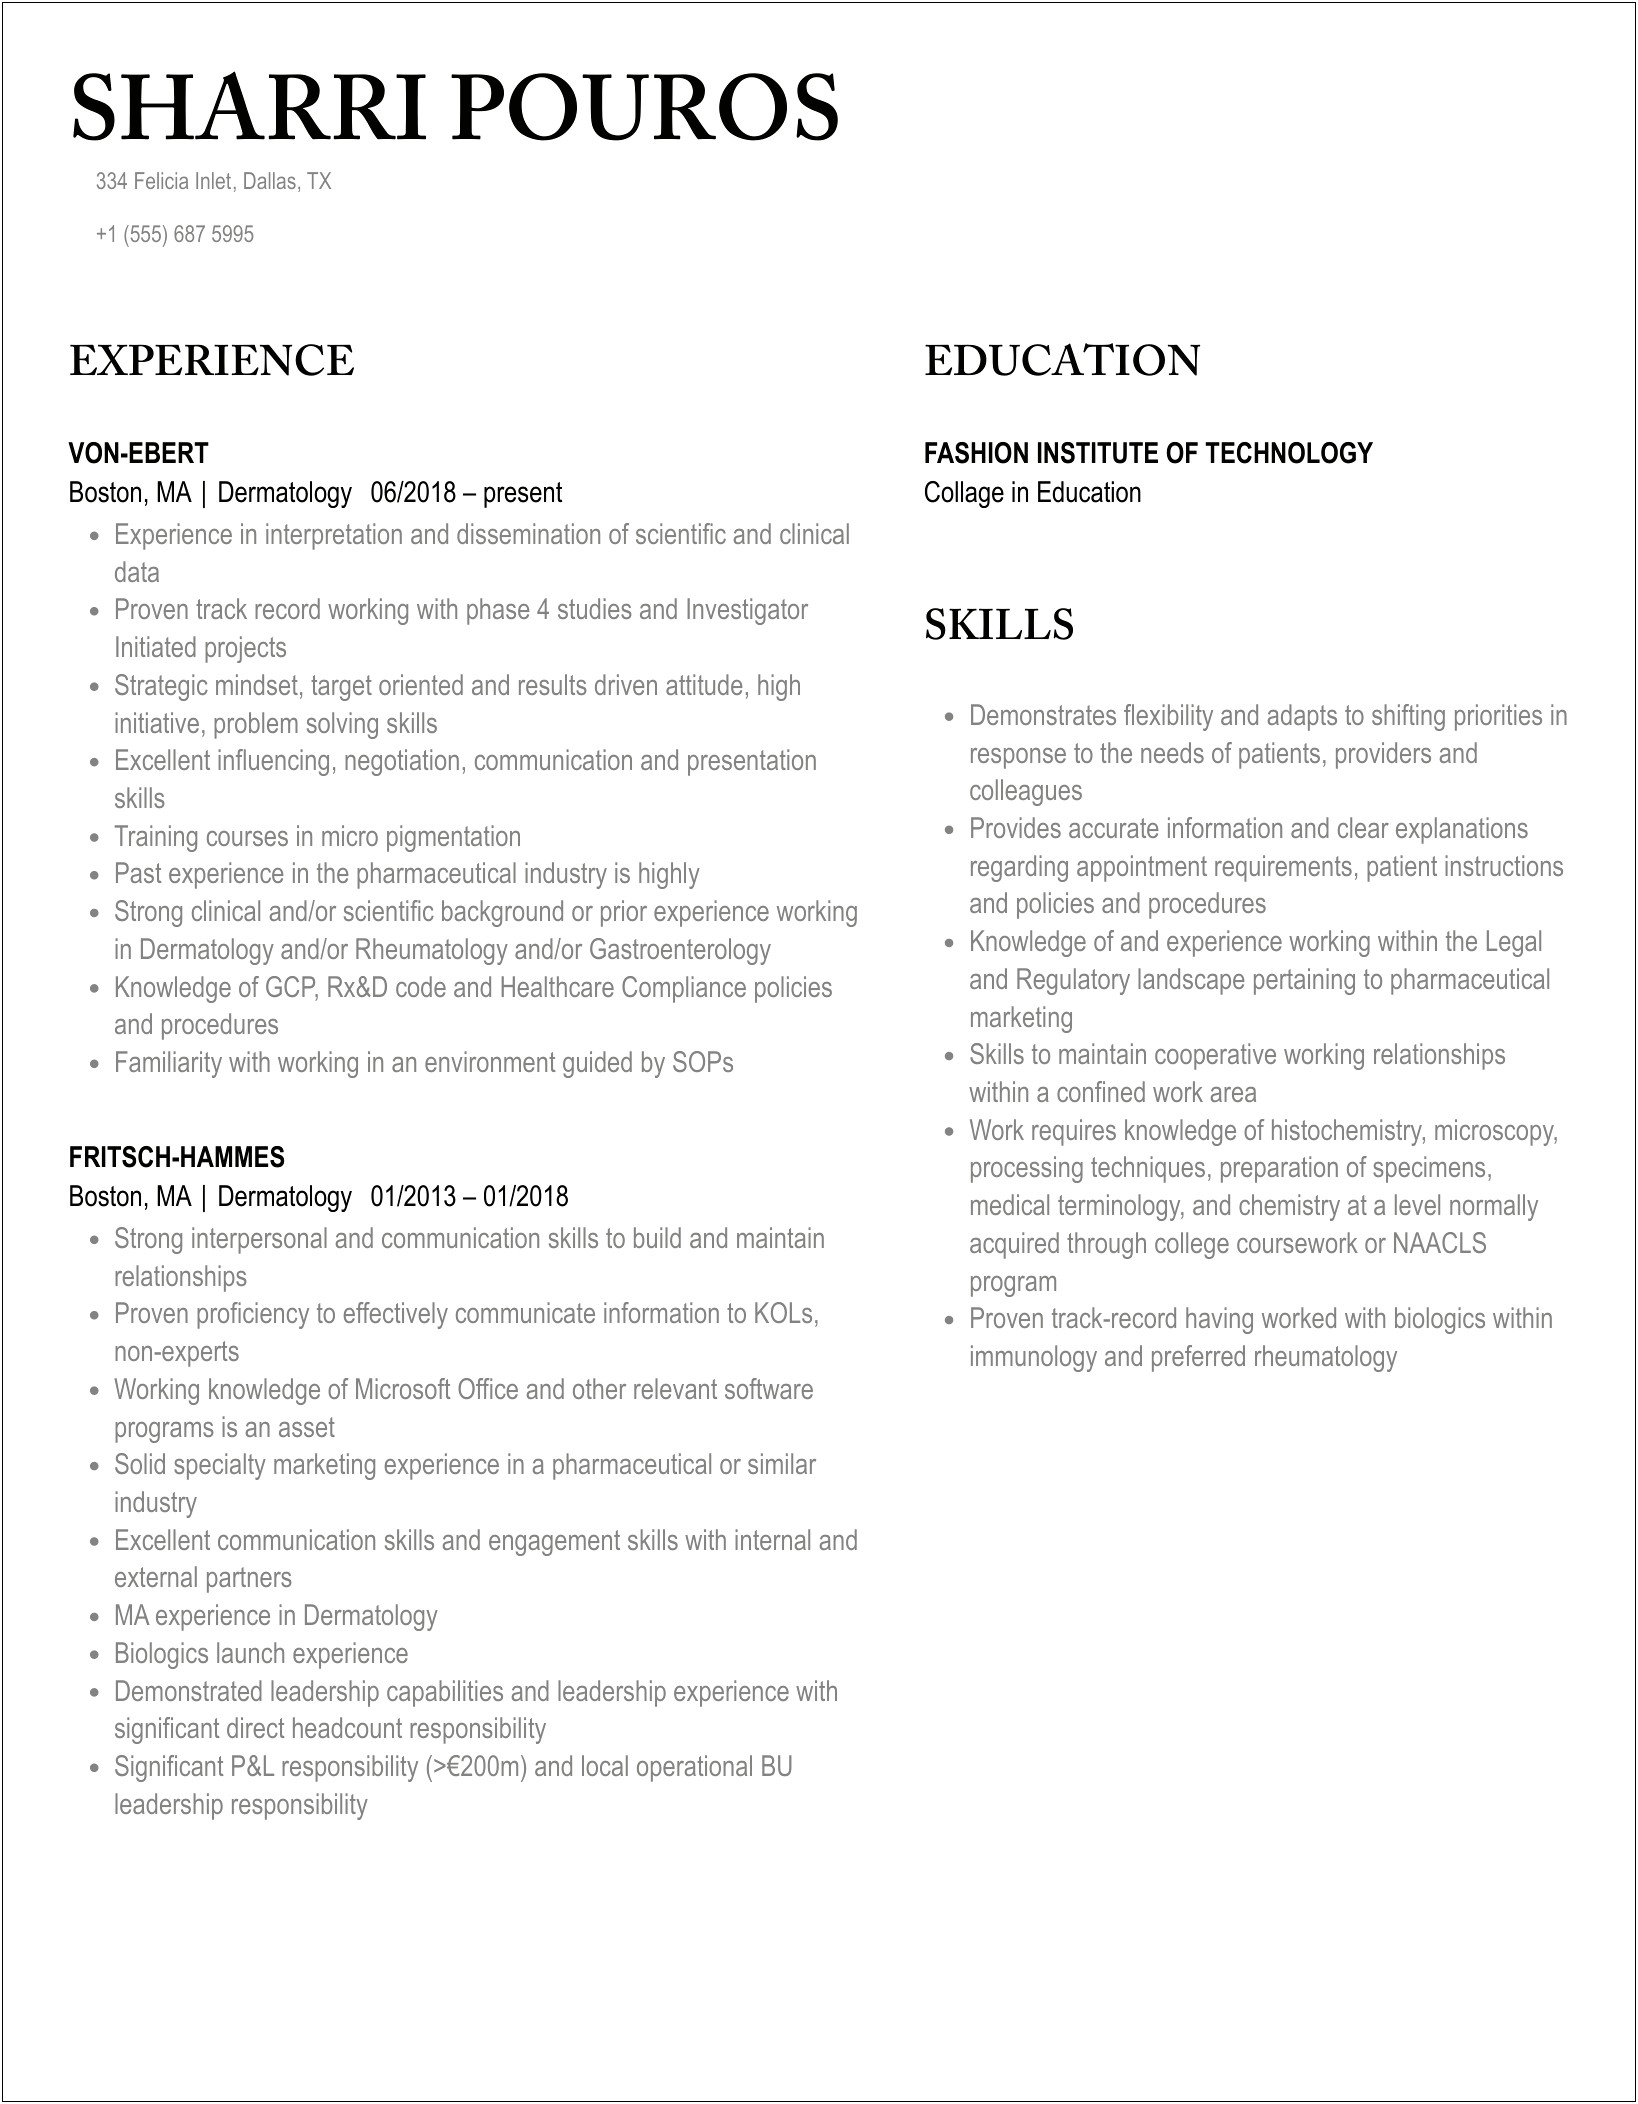 Personal Experience For A Dermatologist Resume